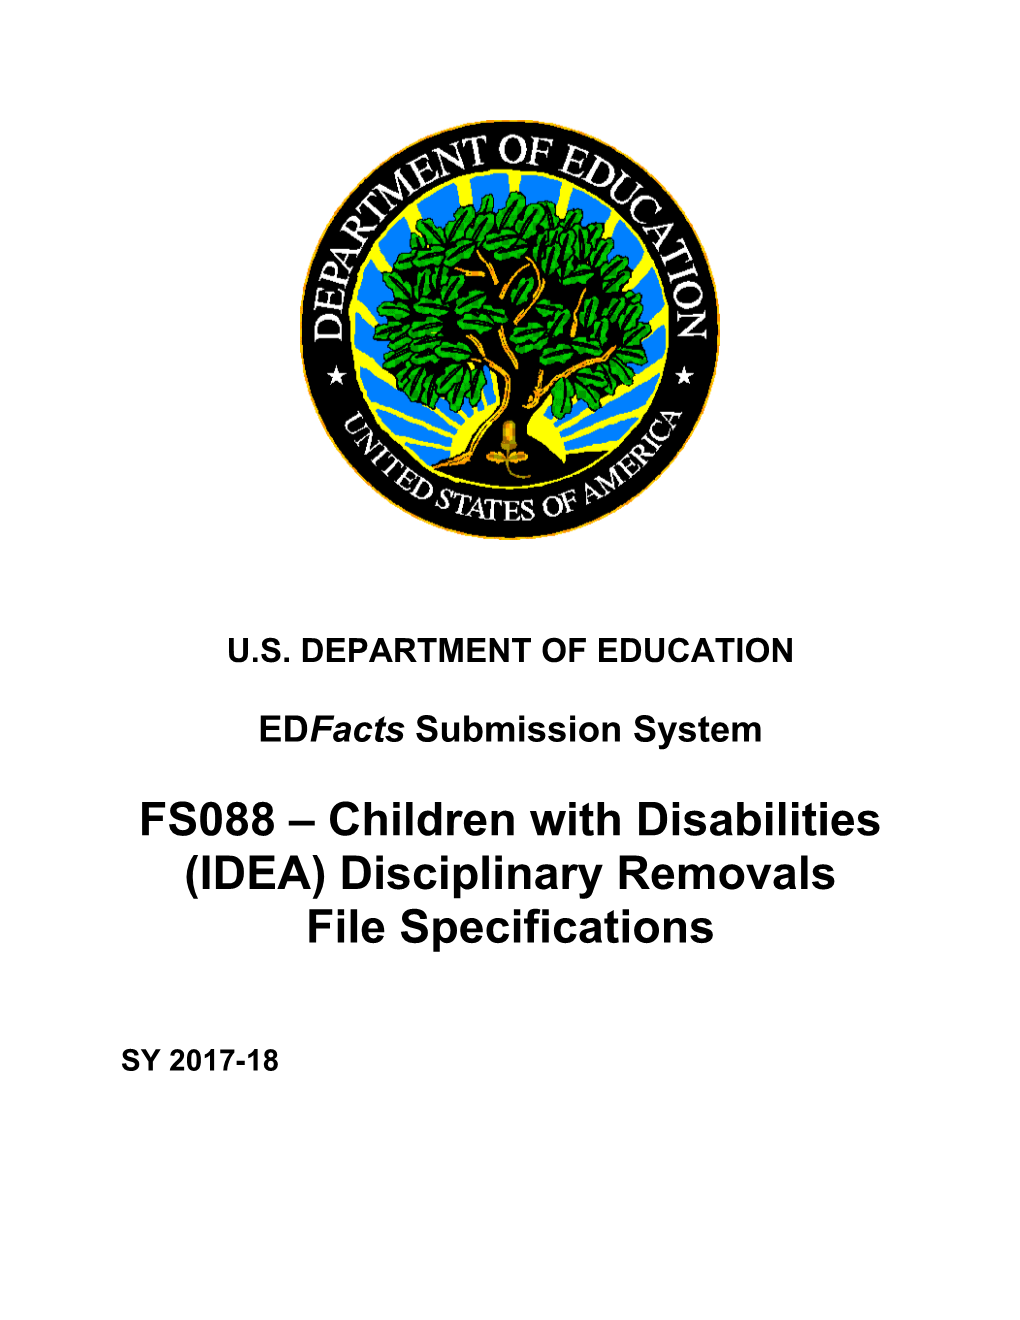 FS088 Children with Disabilities (IDEA) Disciplinary Removals File Specifications (Msword)